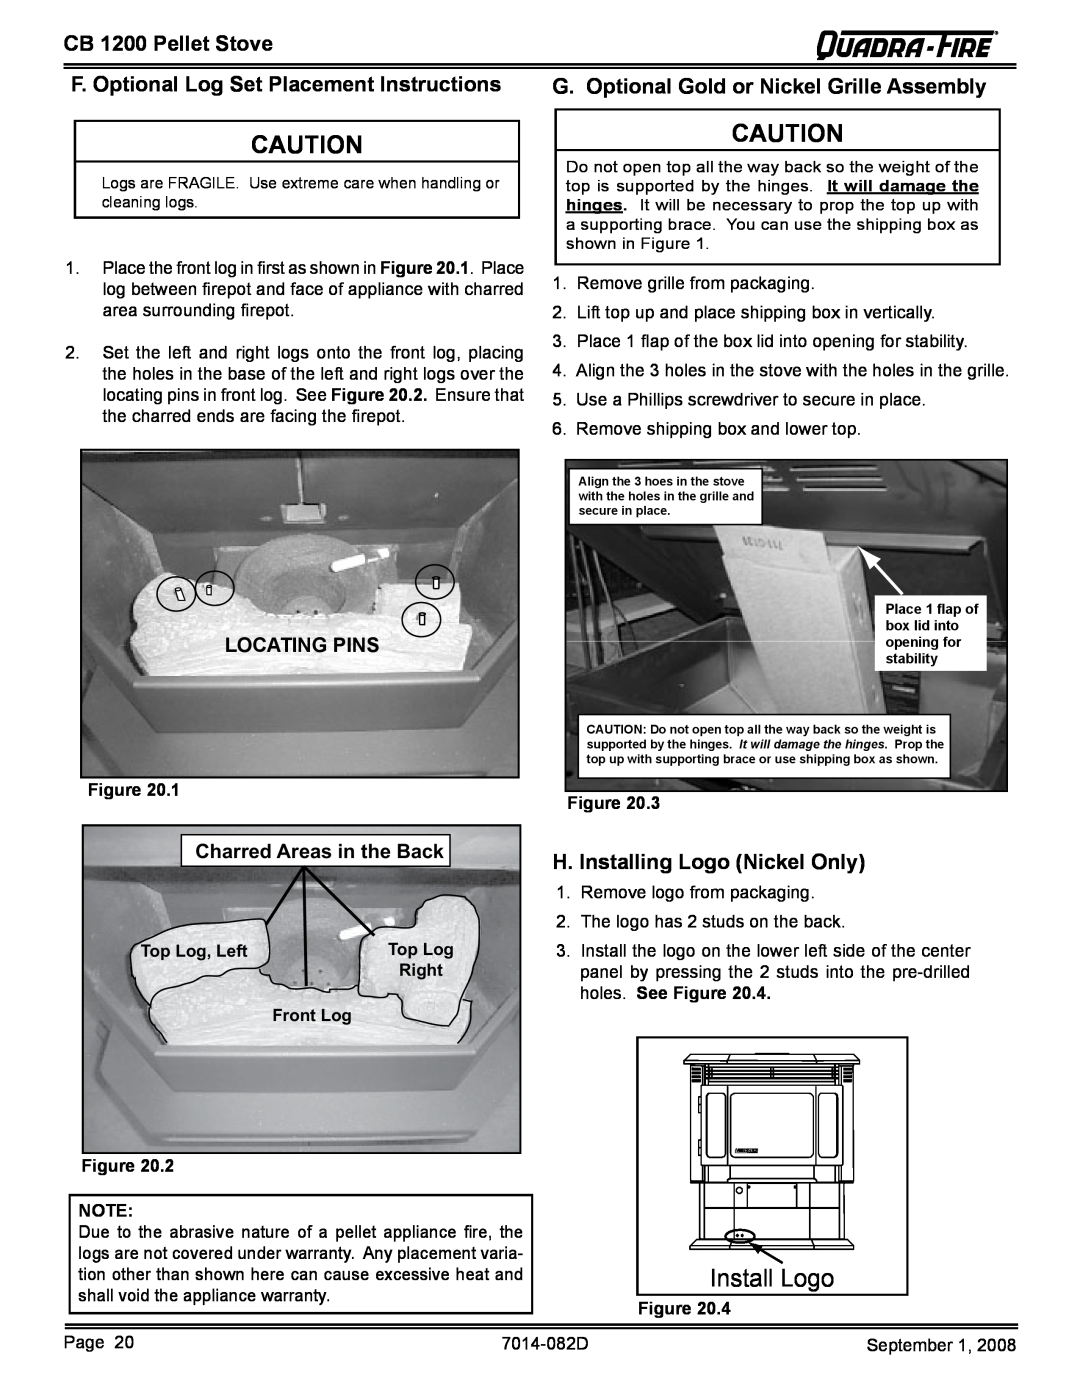 Quadra-Fire CB1200-B F. Optional Log Set Placement Instructions, G. Optional Gold or Nickel Grille Assembly, Locating Pins 